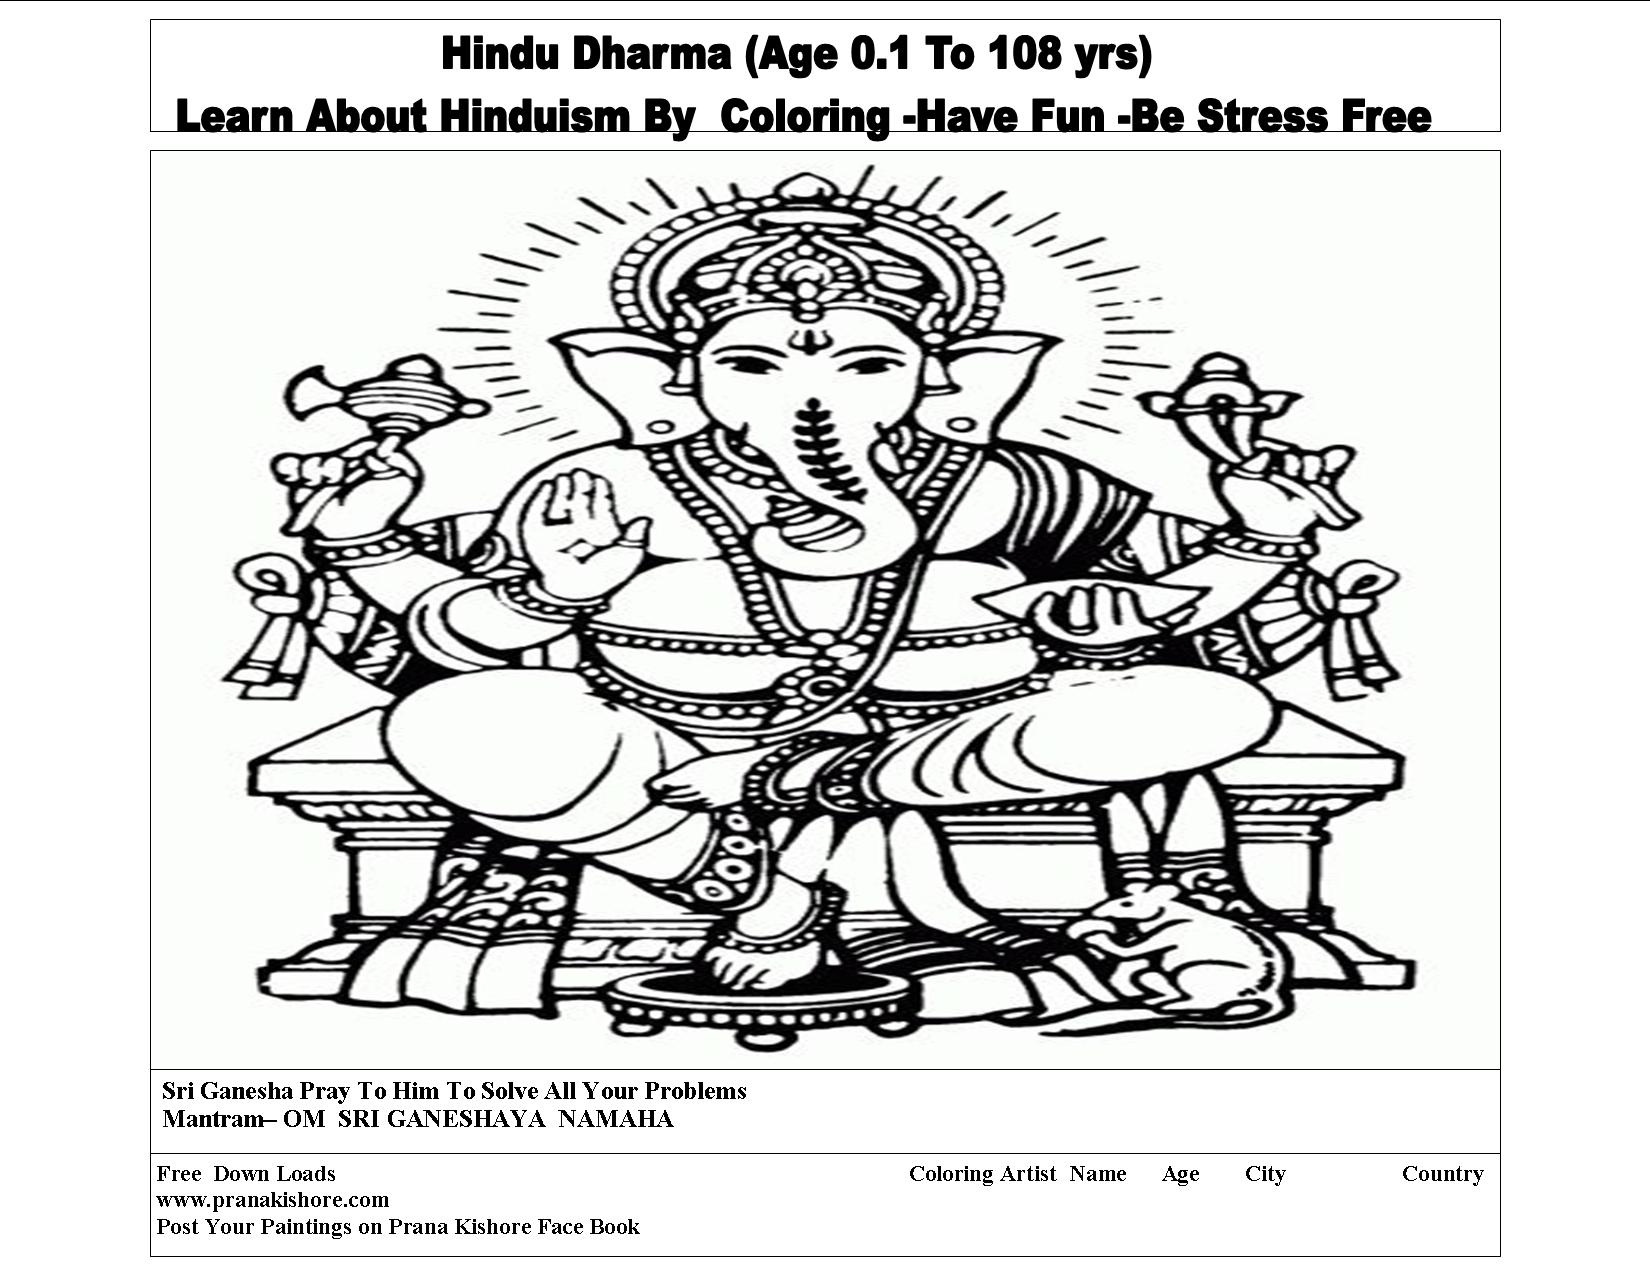 Hindu Dharma Coloring-Sri Ganesha Pray to him To Solve All Your Problems